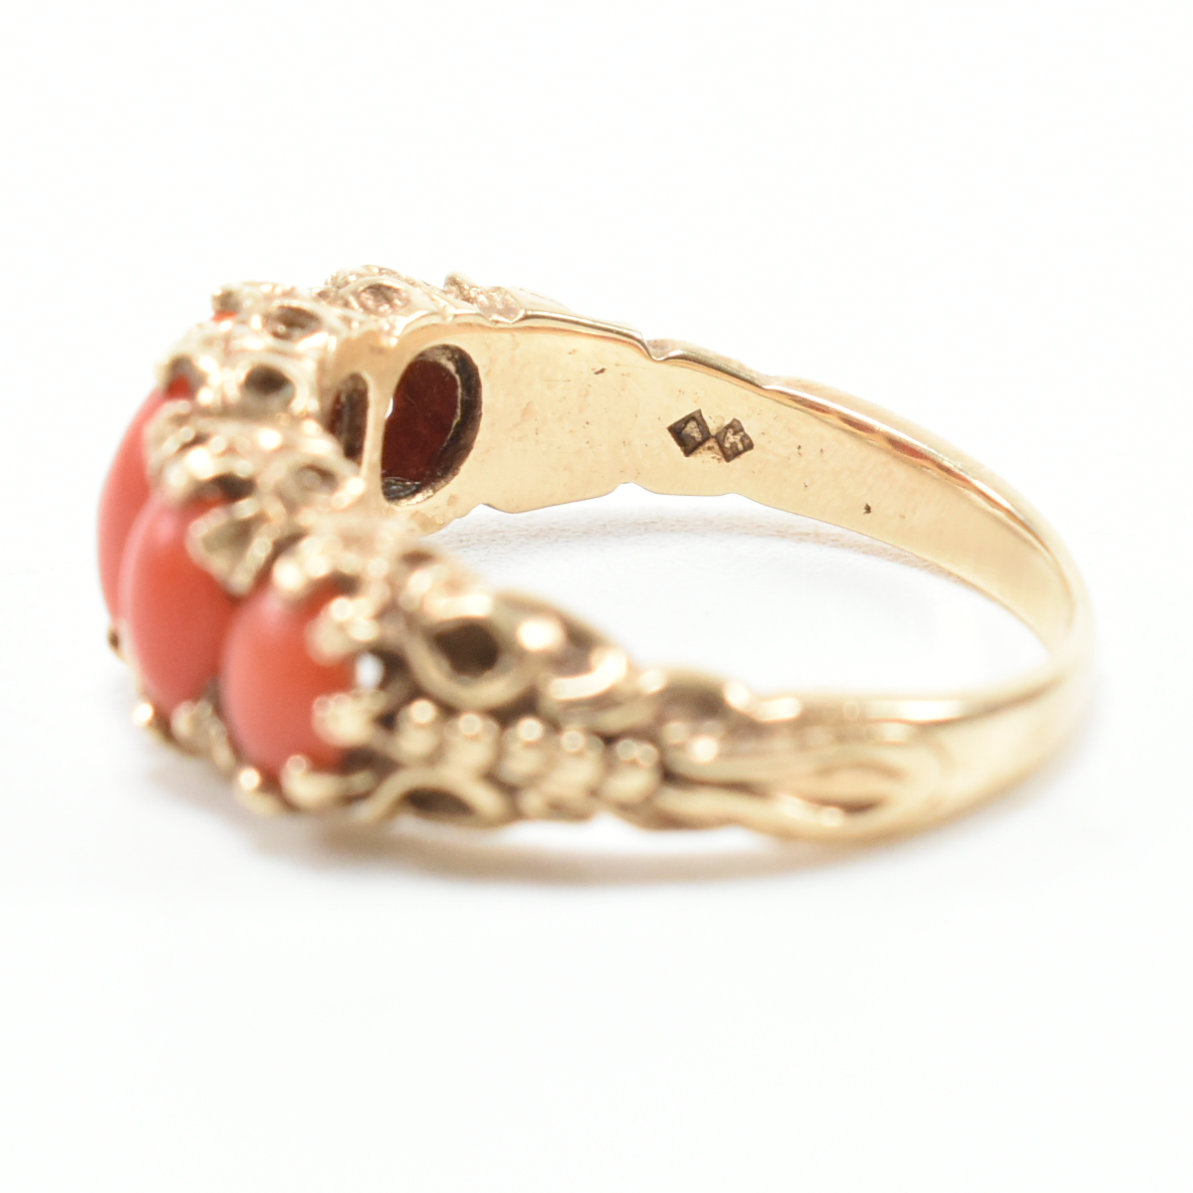 HALLMARKED 9CT GOLD & CORAL FIVE STONE RING - Image 6 of 11